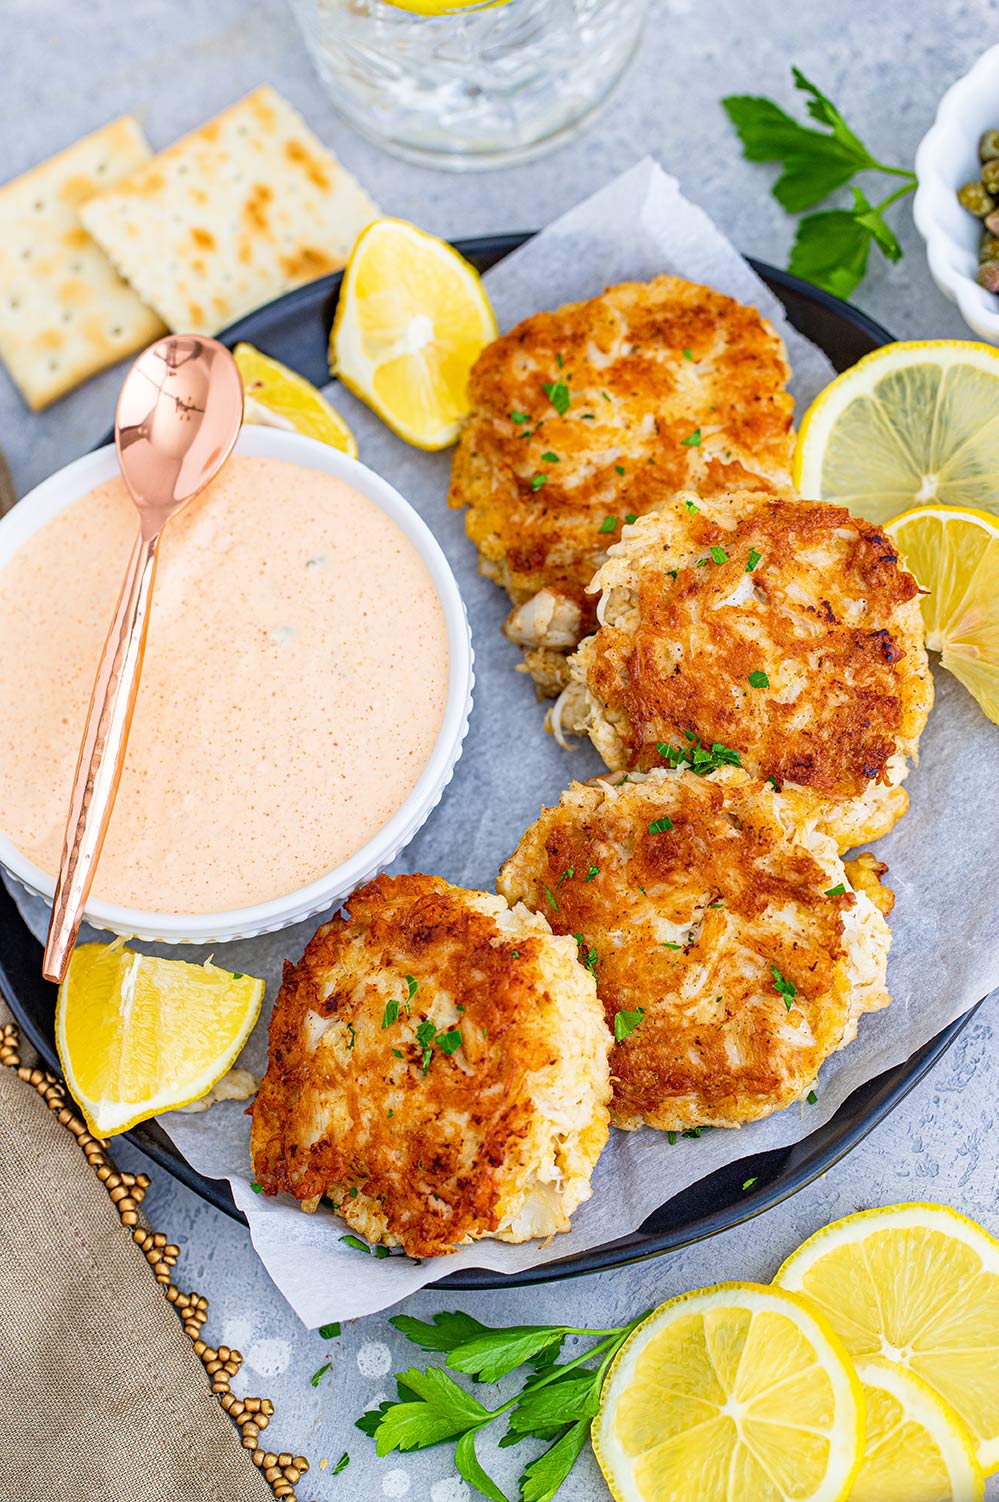 Buttery Ritz Crab Cakes - Recipe by Blackberry Babe